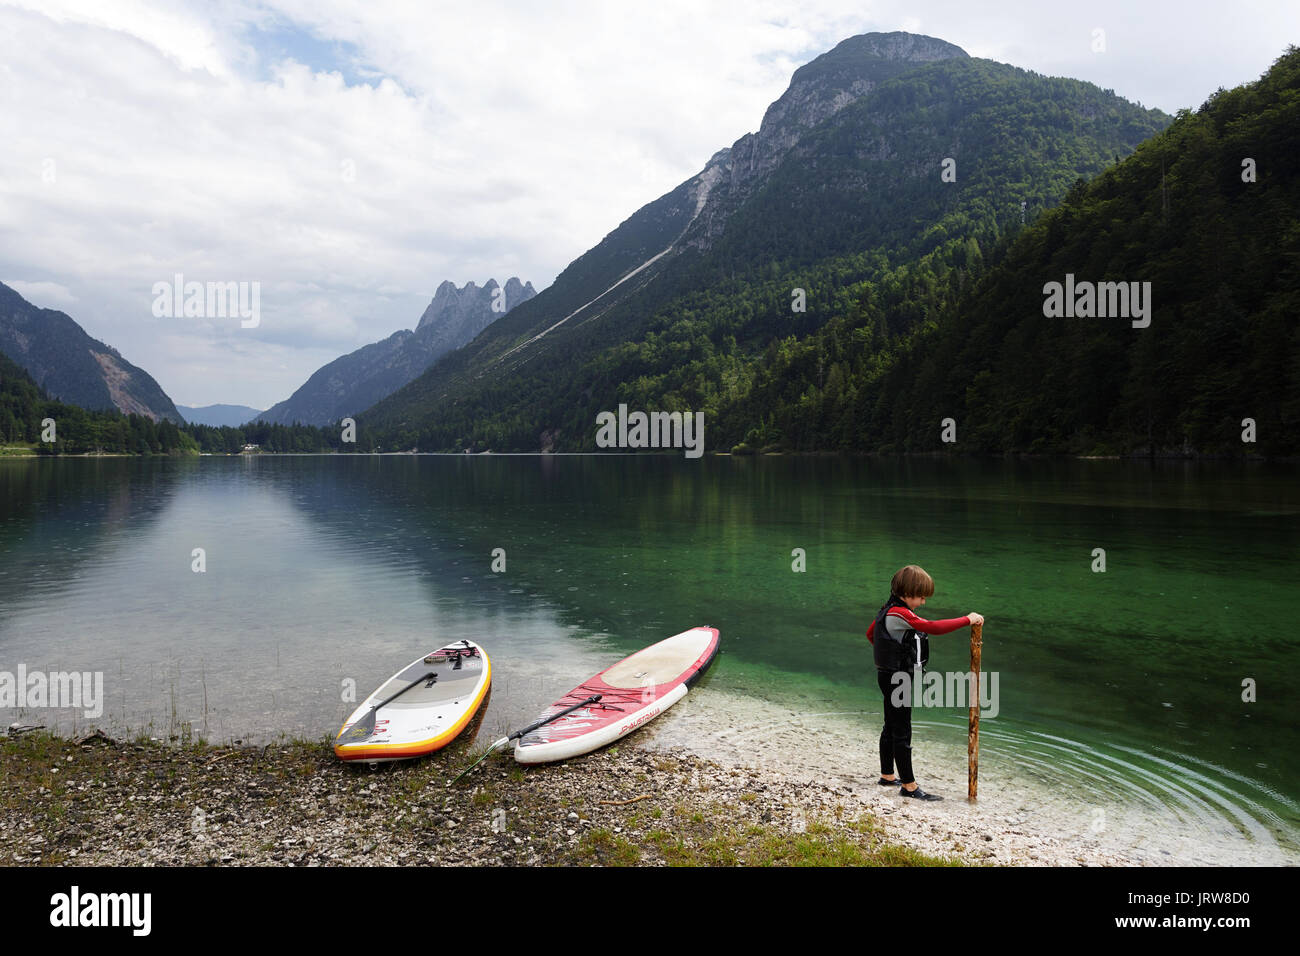 Young boy in a neoprene suit and life jacket playing with a large stick by SUP at alpine lake Lago di Predil, Italy. Stock Photo